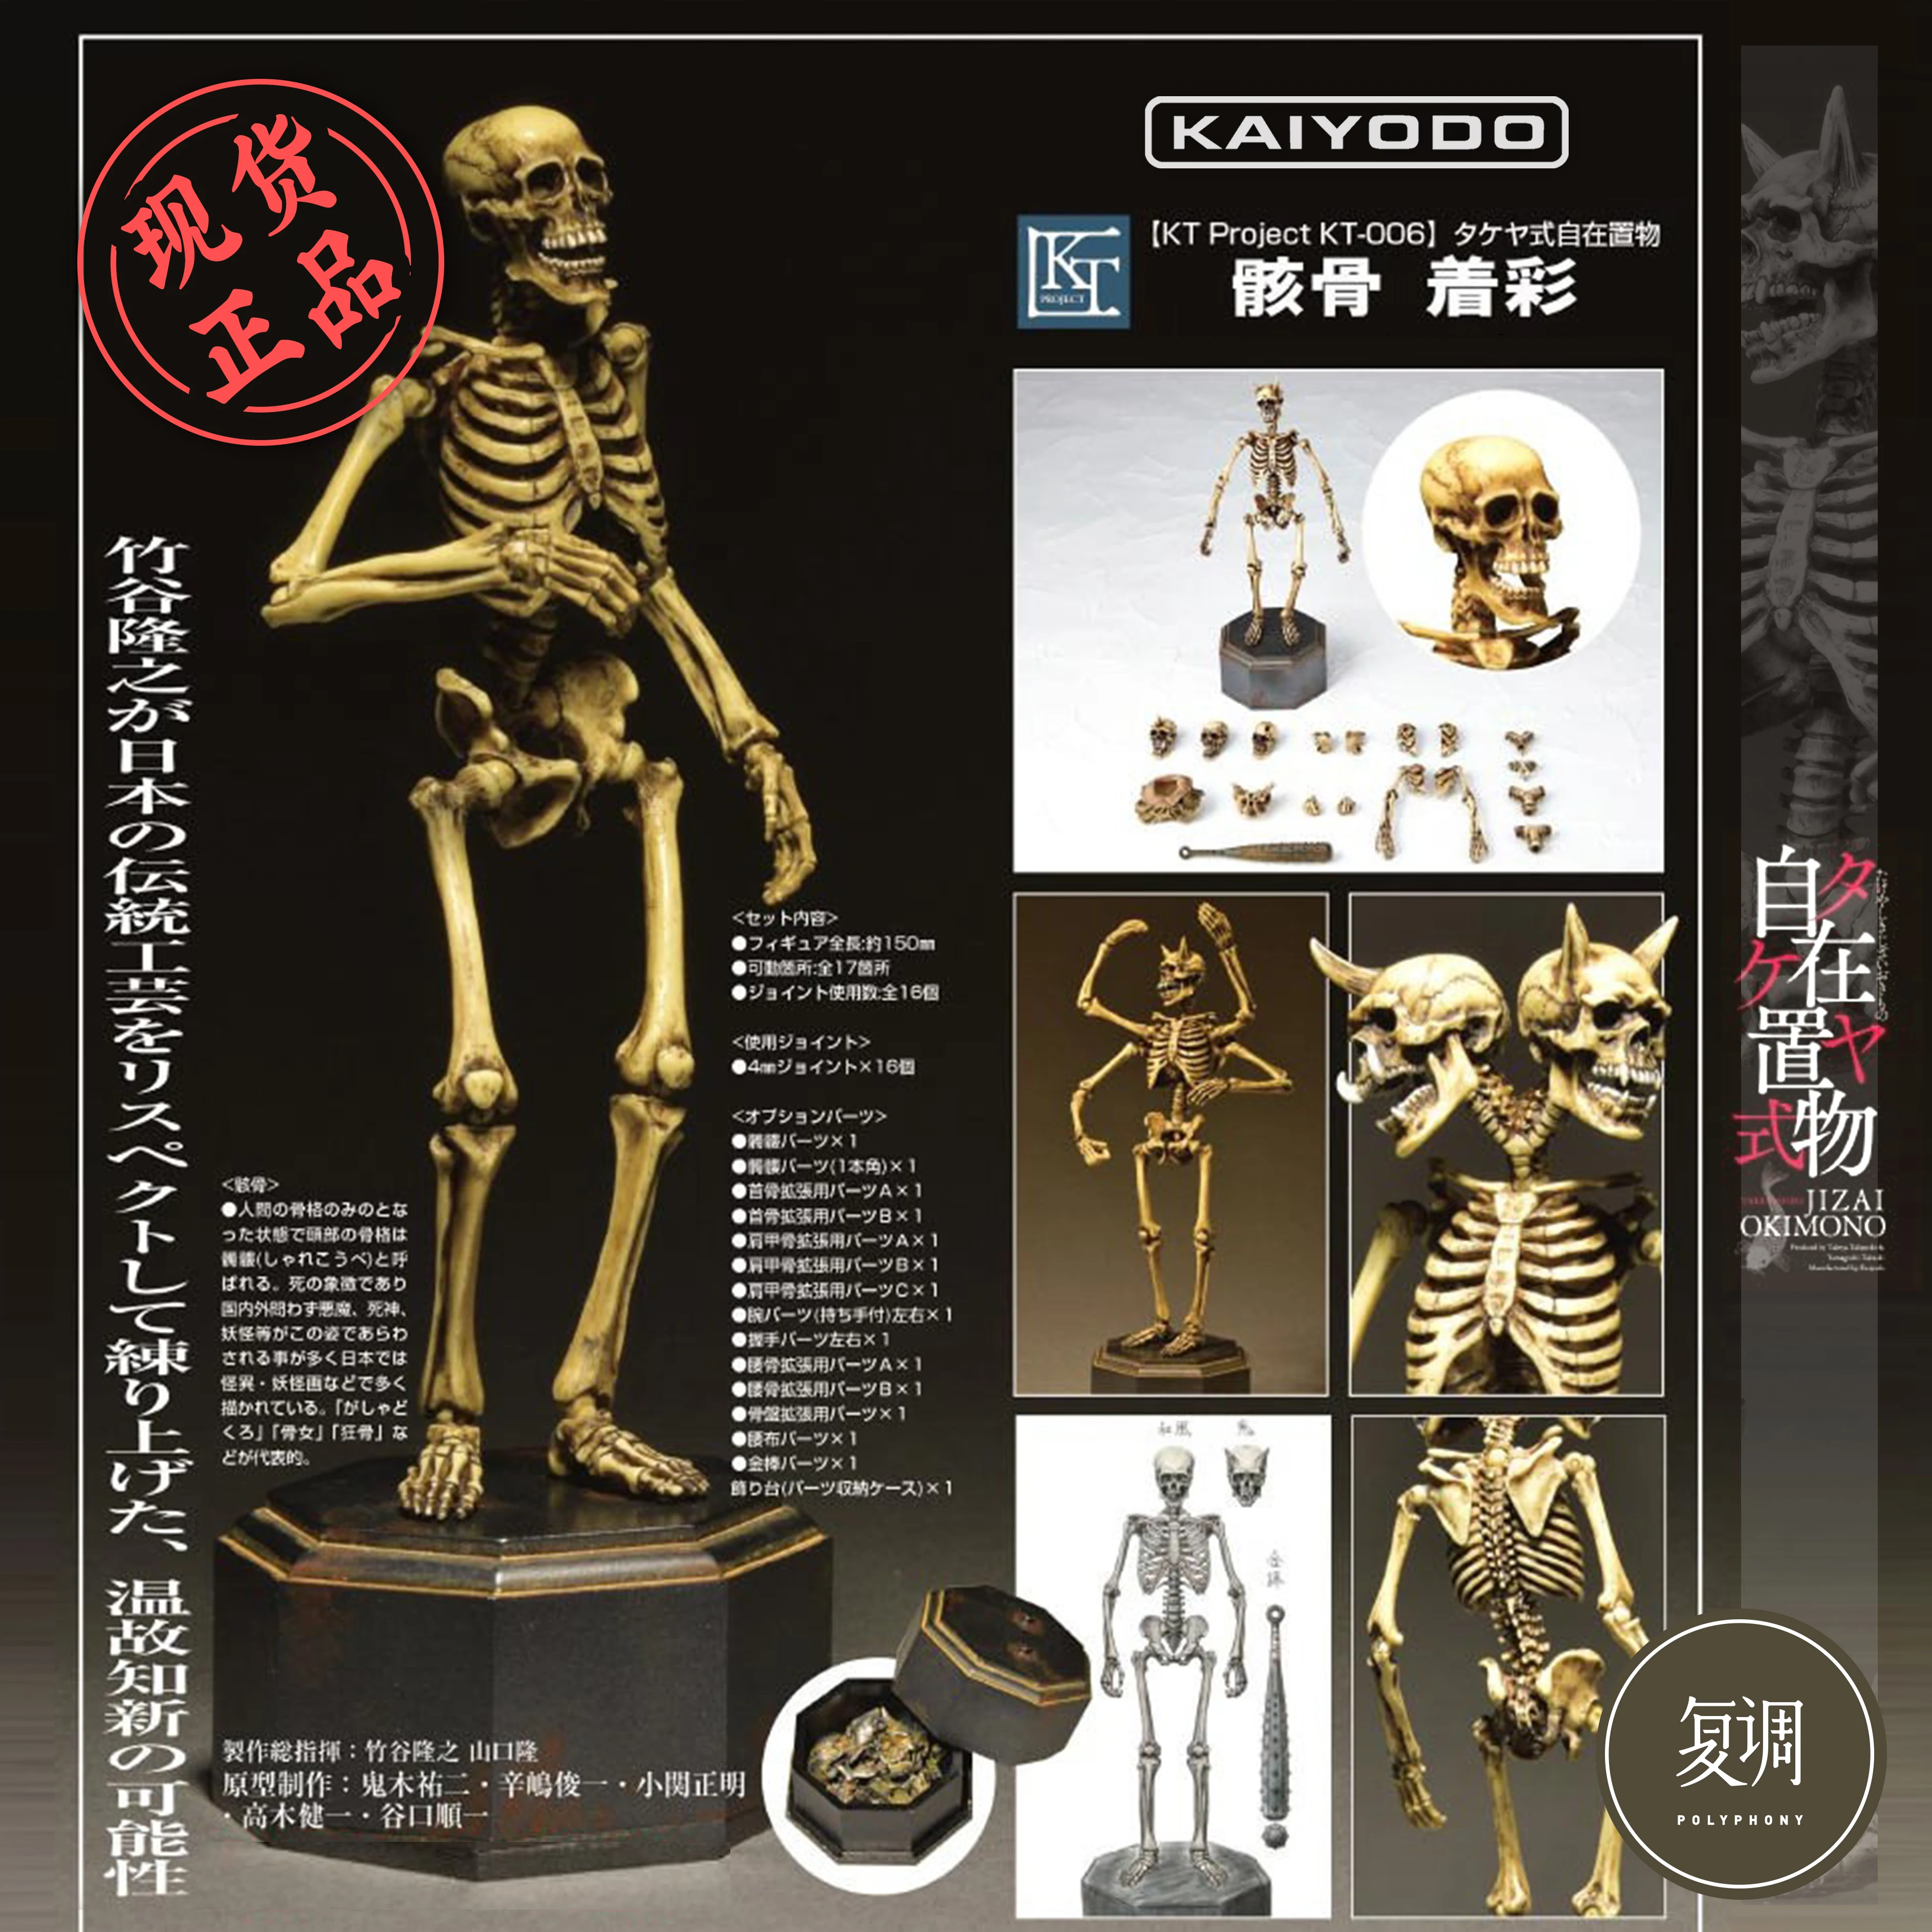 Kt Project Kt 006 Human Skeleton Designed By Takeya Takayuki Joints Movable Ornaments Model Adult Limited Collection Military Action Figures Aliexpress